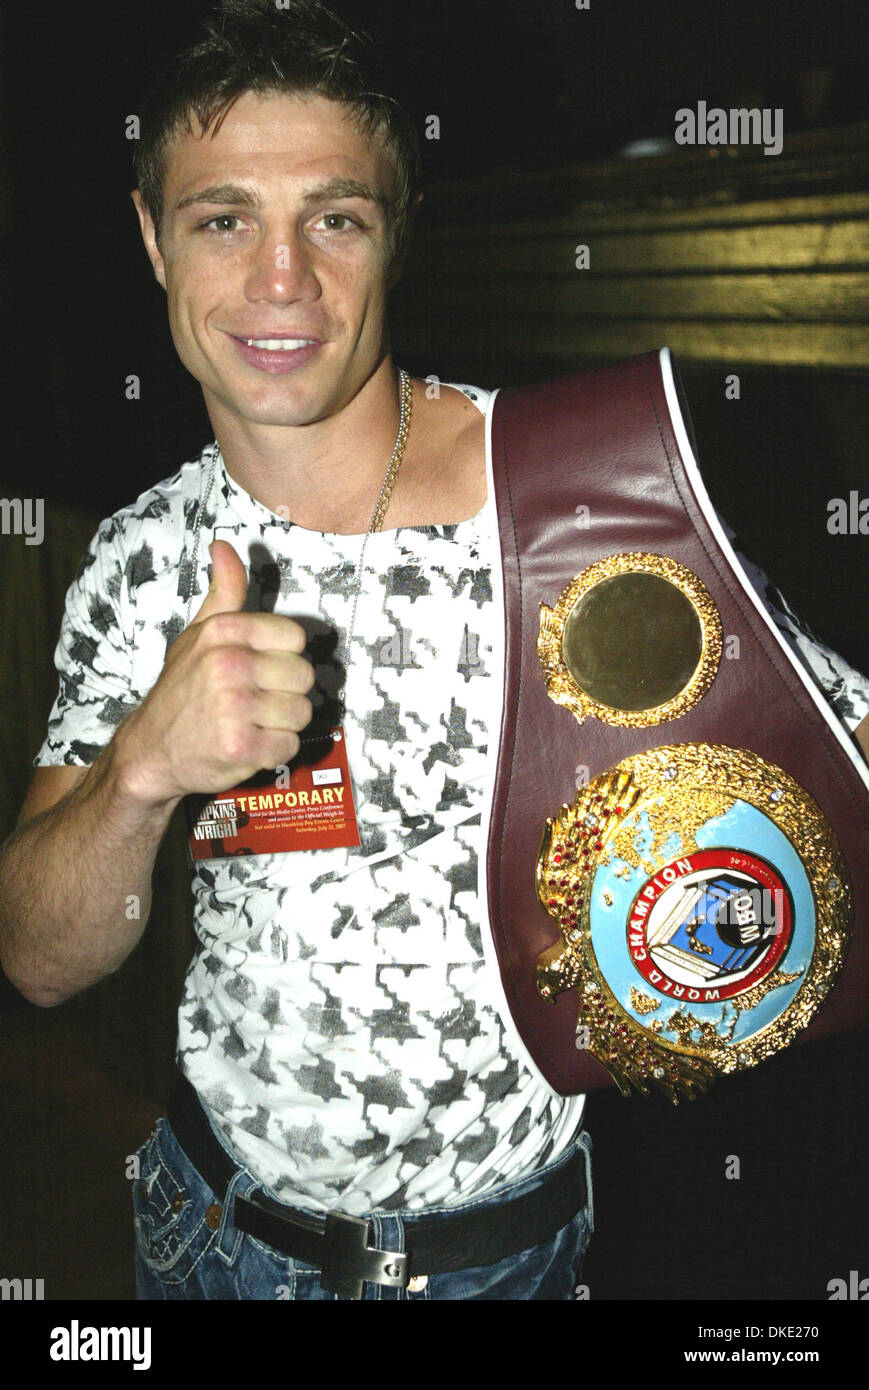 Jul 19, 2007 - Las Vegas, NV, USA - At The House of Blues night club in The Mandalay Bay Resort and Casino in Las Vegas, for the final press conference for BERNARD HOPKINS and WINKY WRIGHT. PICTURED: Australia's undefeated fighter MICHAEL KATSIDIS will be fighting July 21against Czar Amonsot at the Mandalay Bay event center. (Credit Image: © Mary Ann Owen/ZUMA Press) Stock Photo